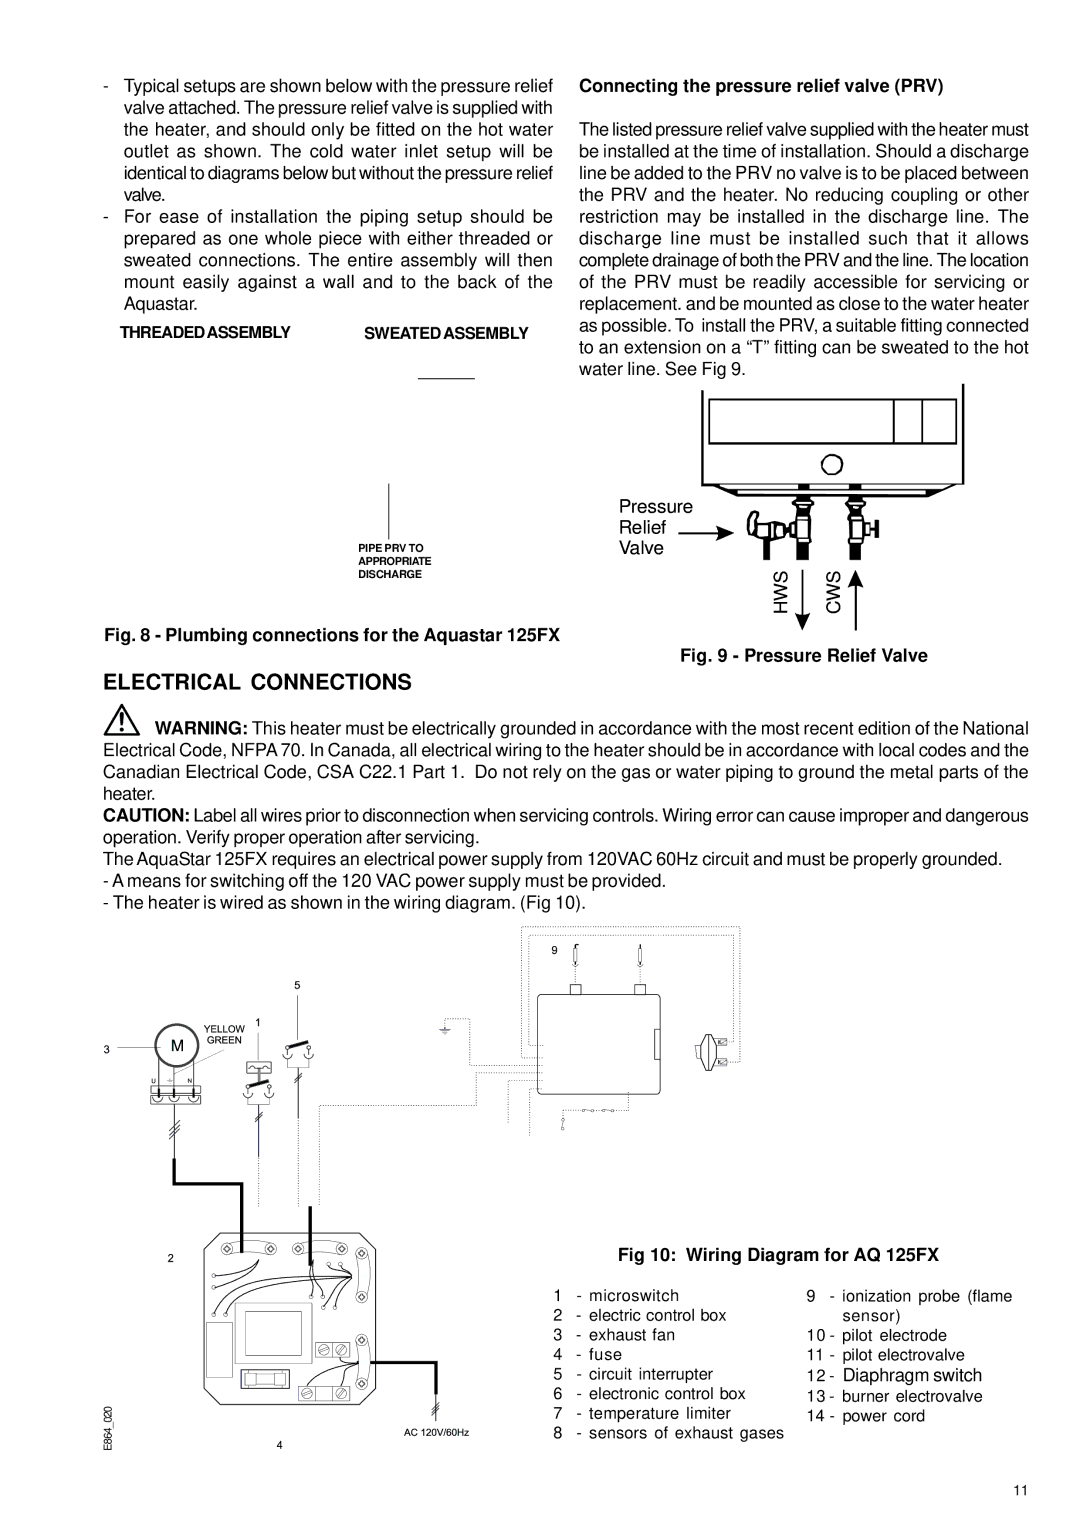 Bosch Appliances 125FX NG Electrical Connections, Connecting the pressure relief valve PRV, Wiring Diagram for AQ 125FX 